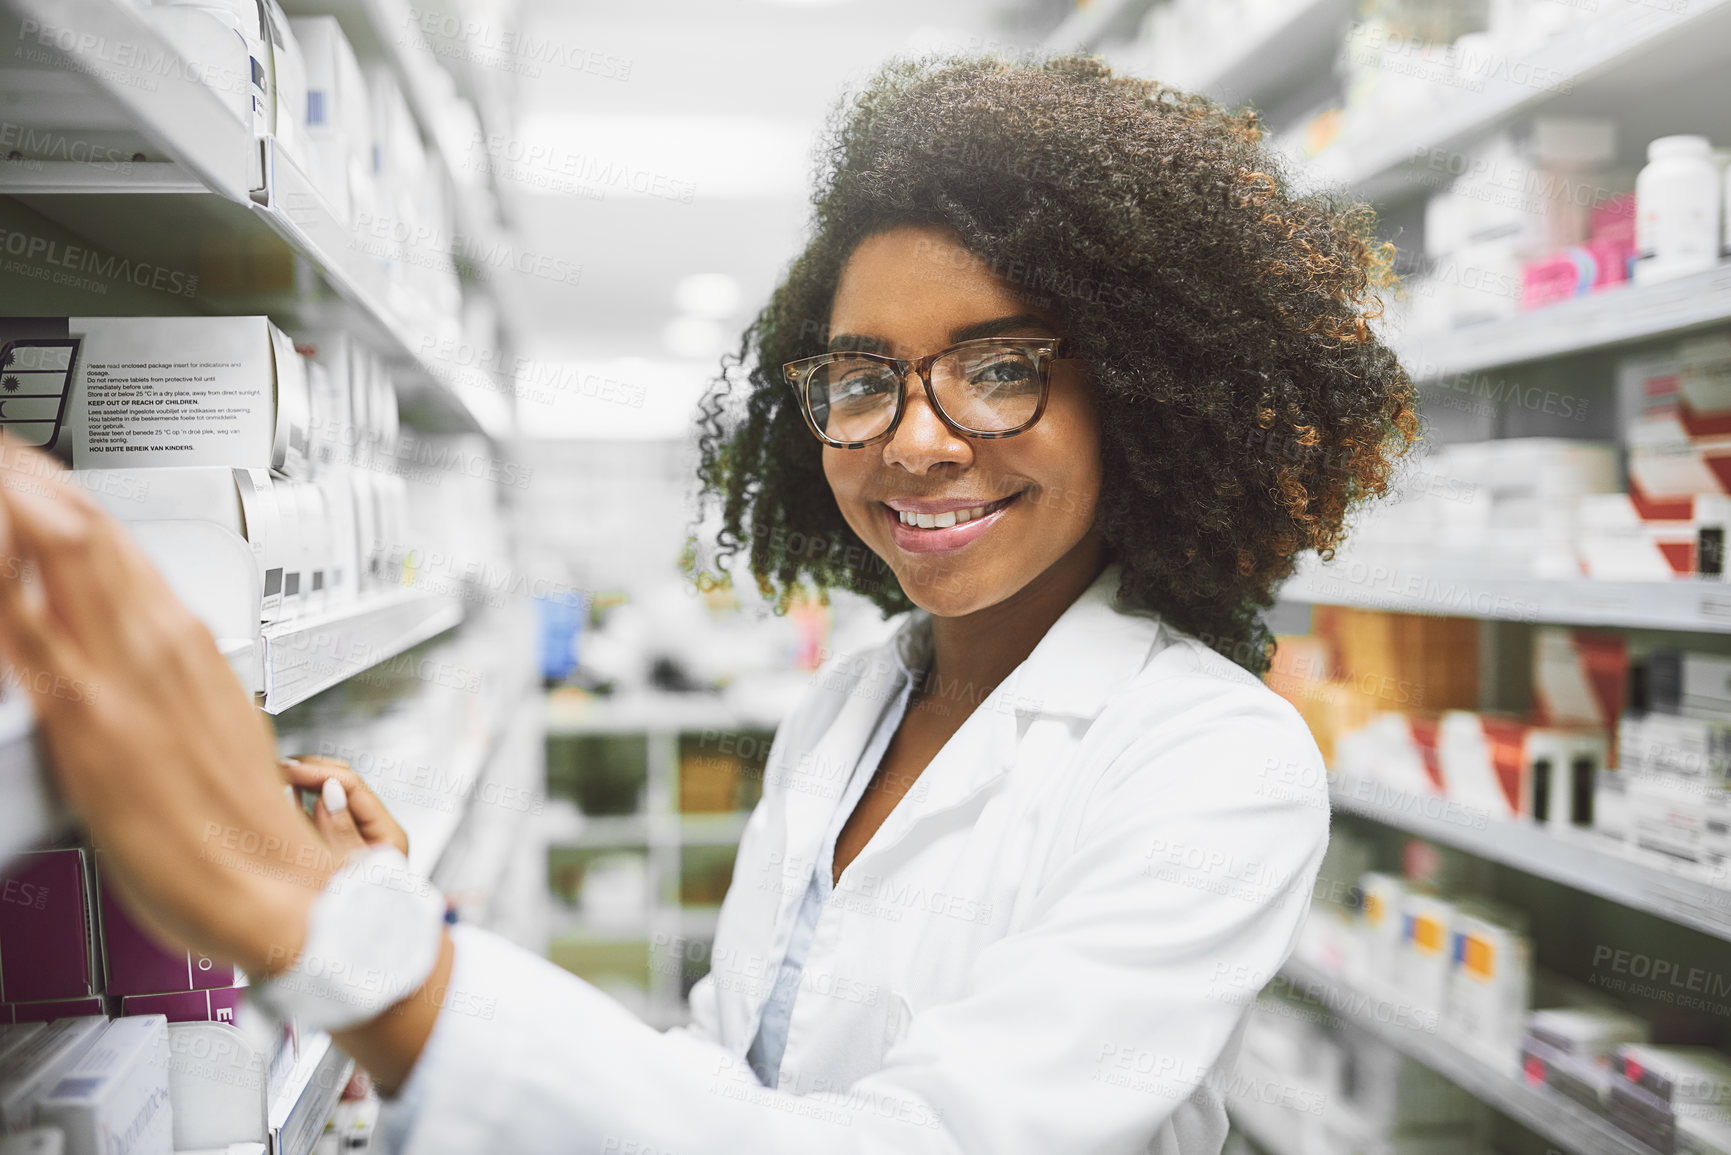 Buy stock photo Portrait of a cheerful young female pharmacist packing medication on shelves inside of a pharmacy while looking at the camera